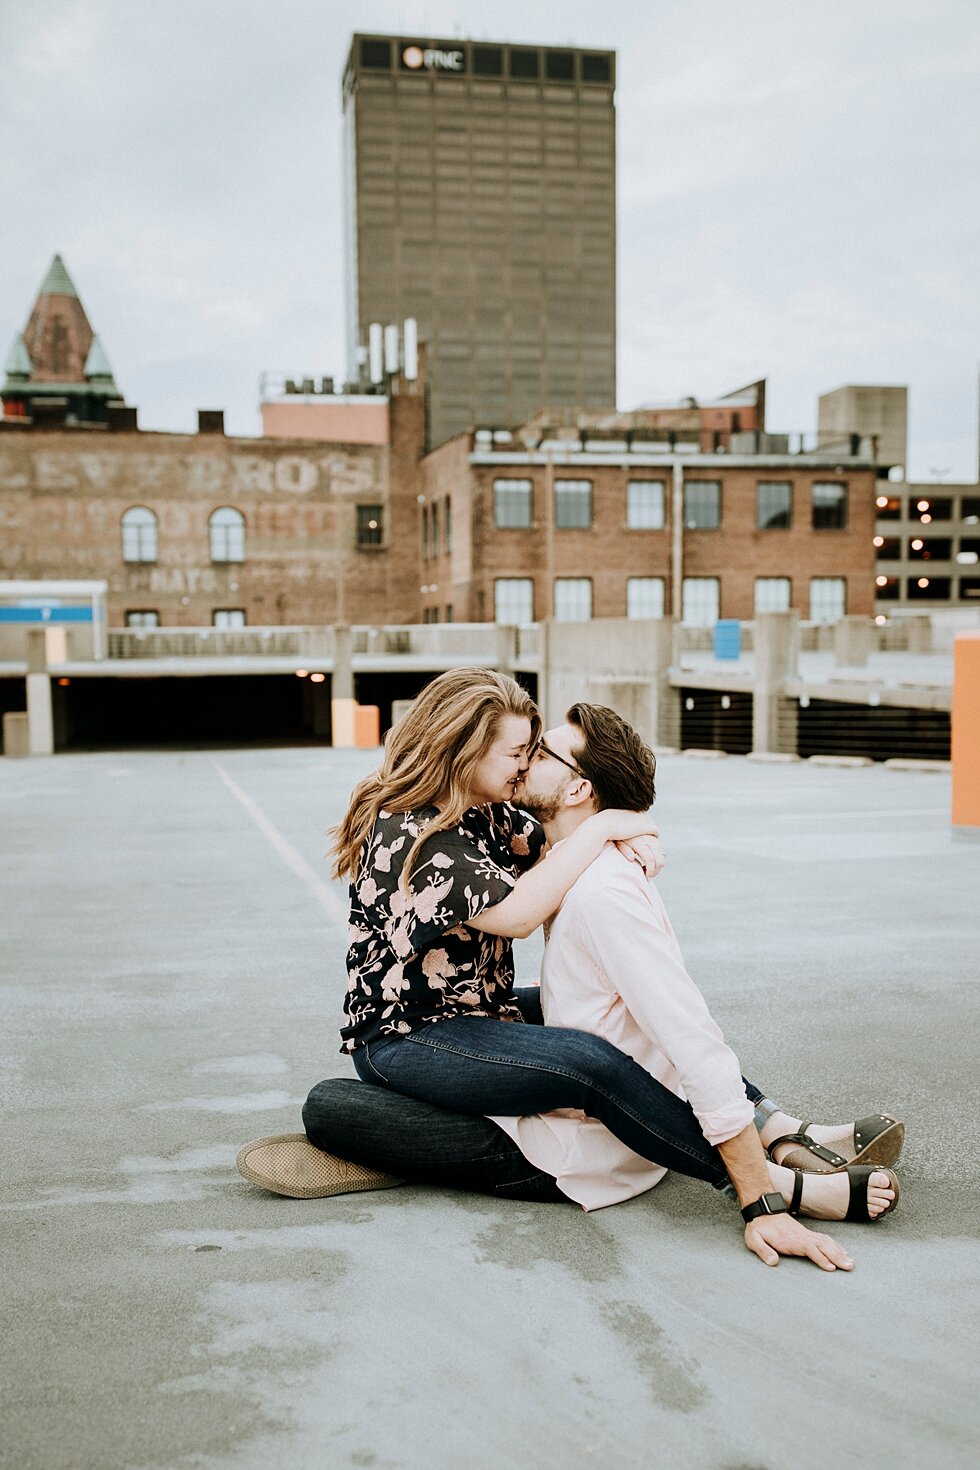  Rooftop engagement session in Louisville, Kentucky. getting married outdoor session engaged couple together wedding preparation love excited stunning relationship #engagementphotos #midwestphotographer #kywedding #louisville #stjamescourt #summereng